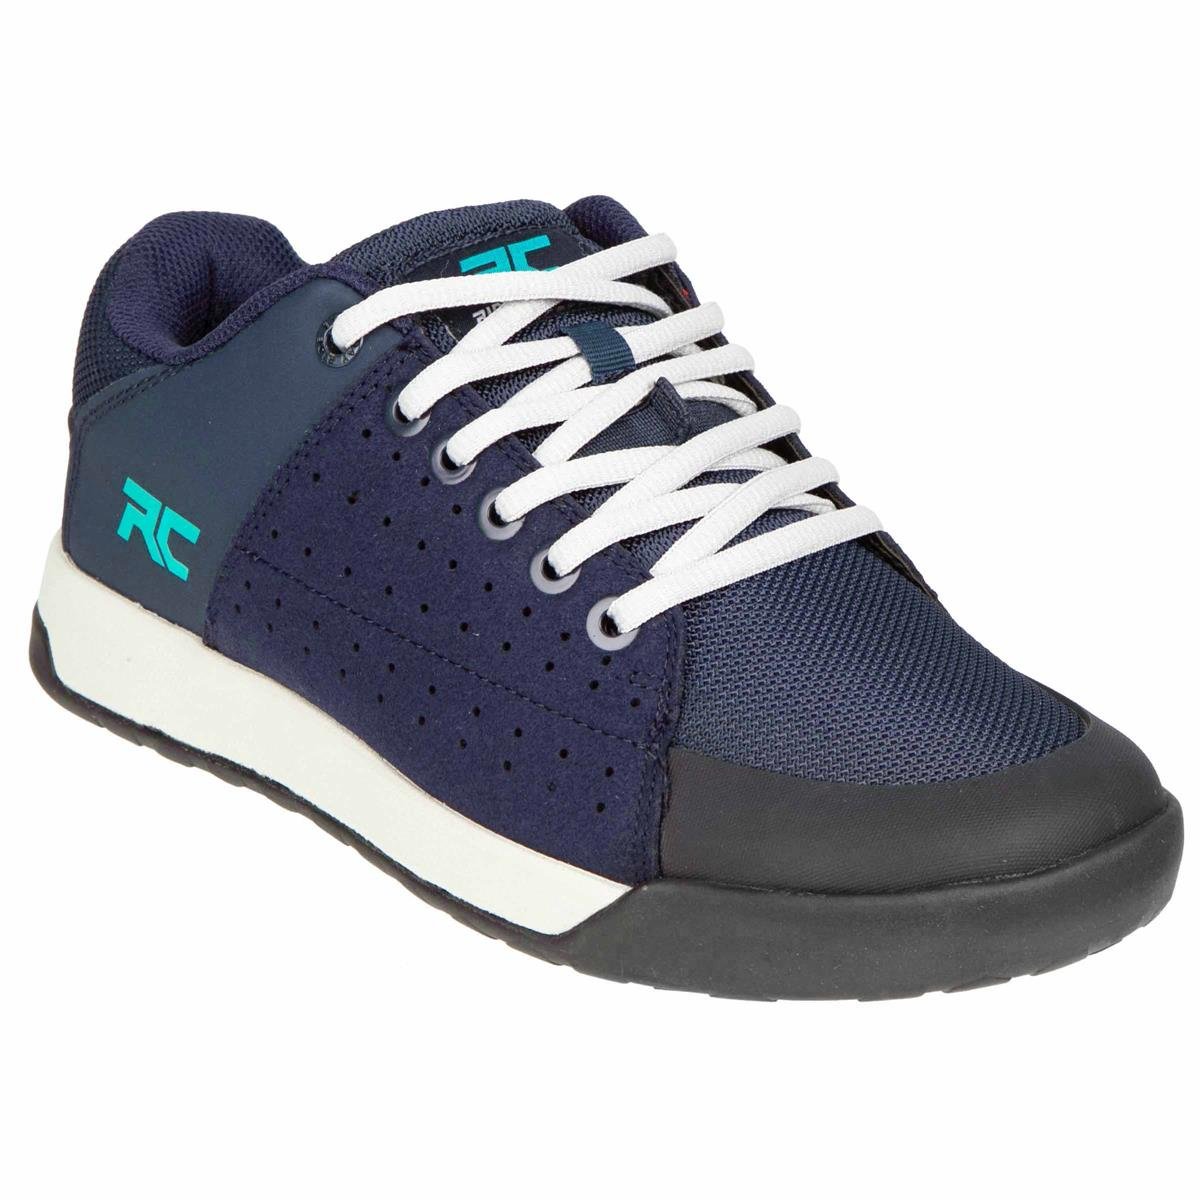 Ride Concepts Femme Chaussures VTT Livewire Navy/Teal